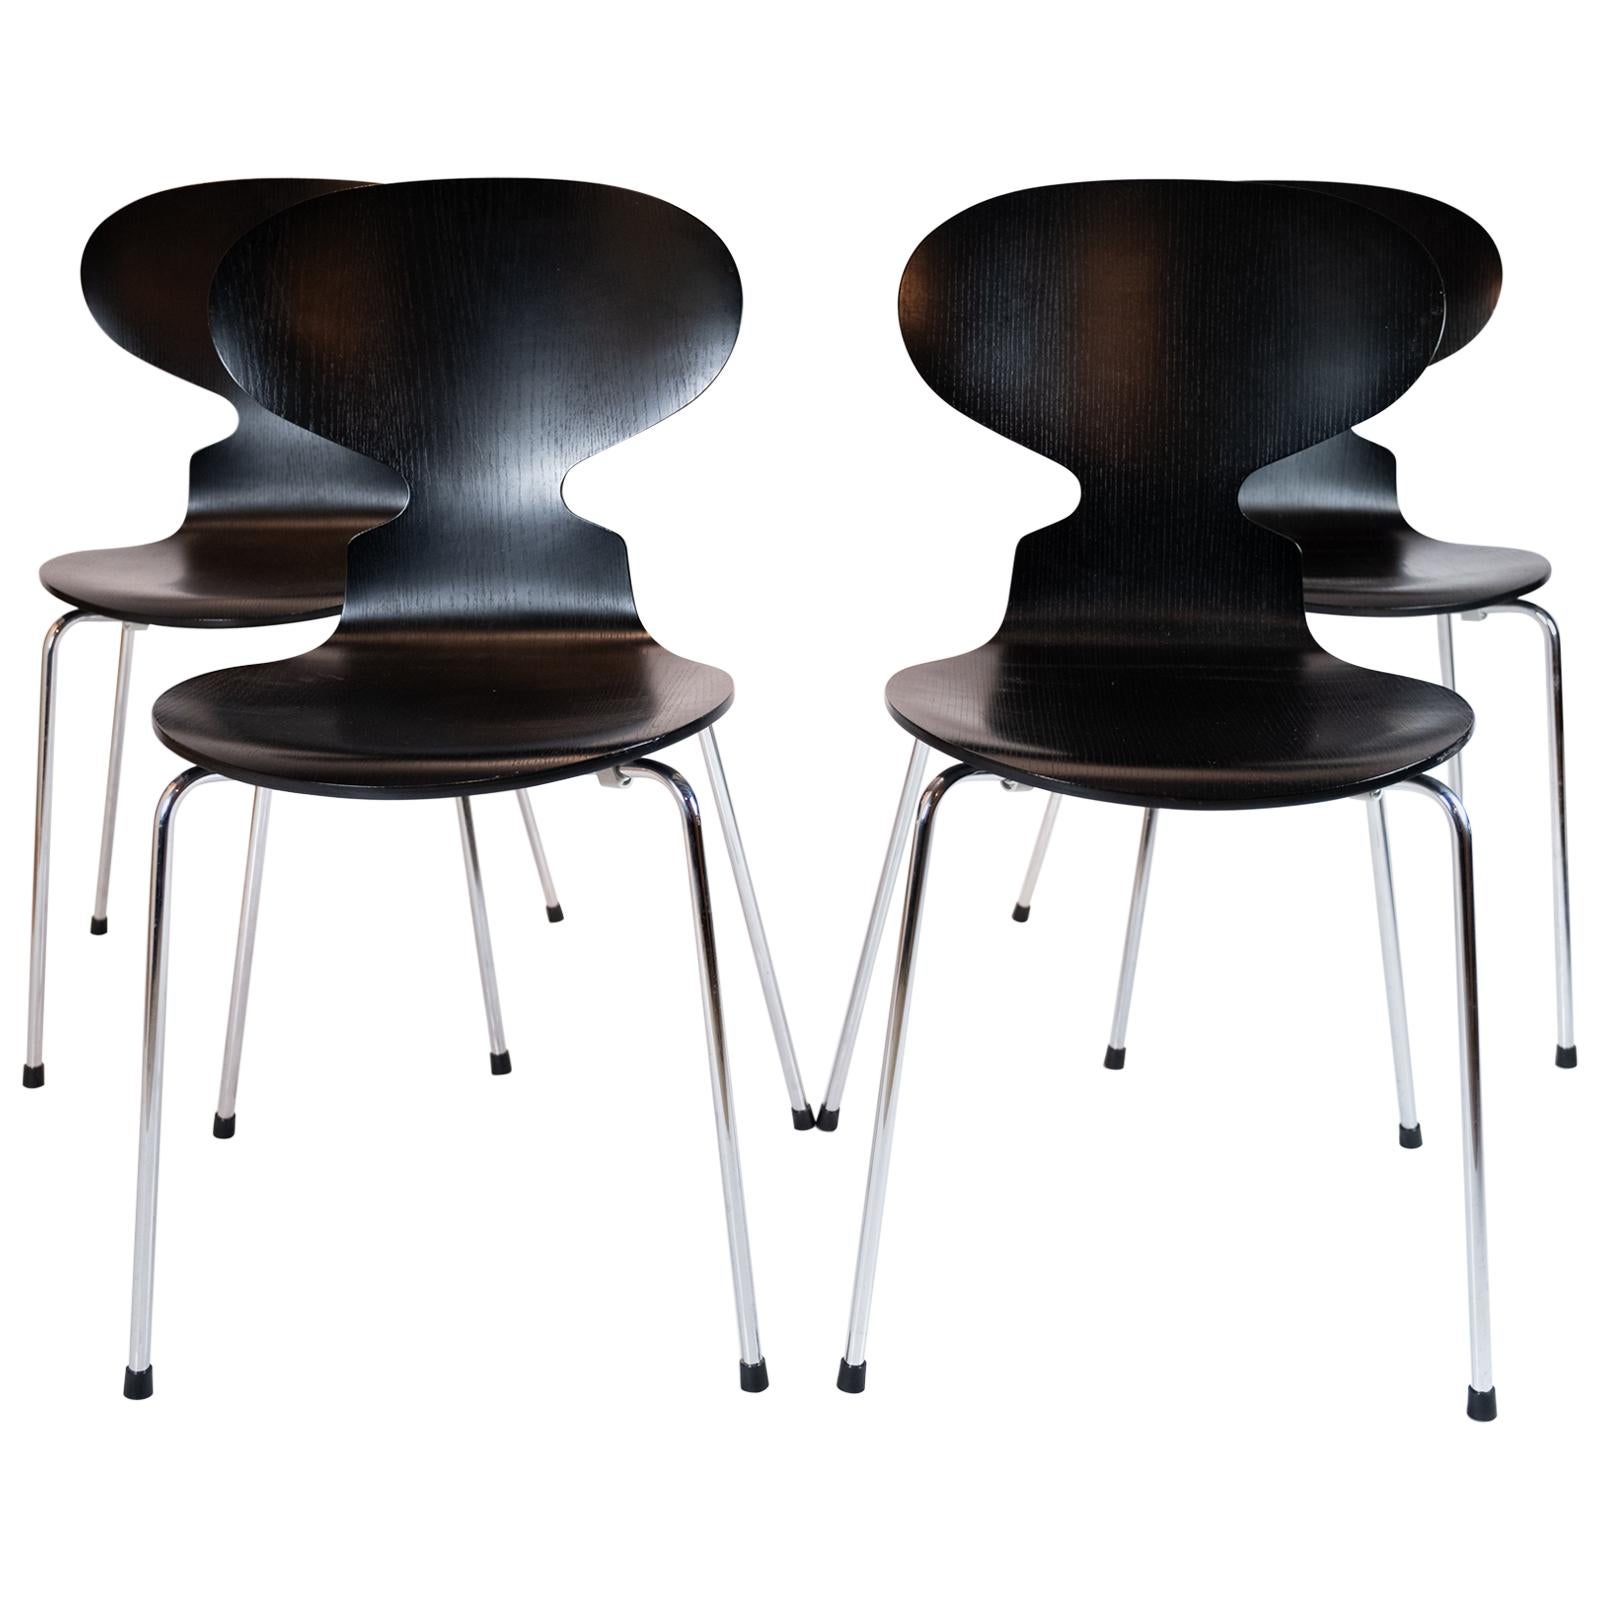 Set of Four Black Ant Chairs, Model 3101, Designed by Arne Jacobsen in 1952